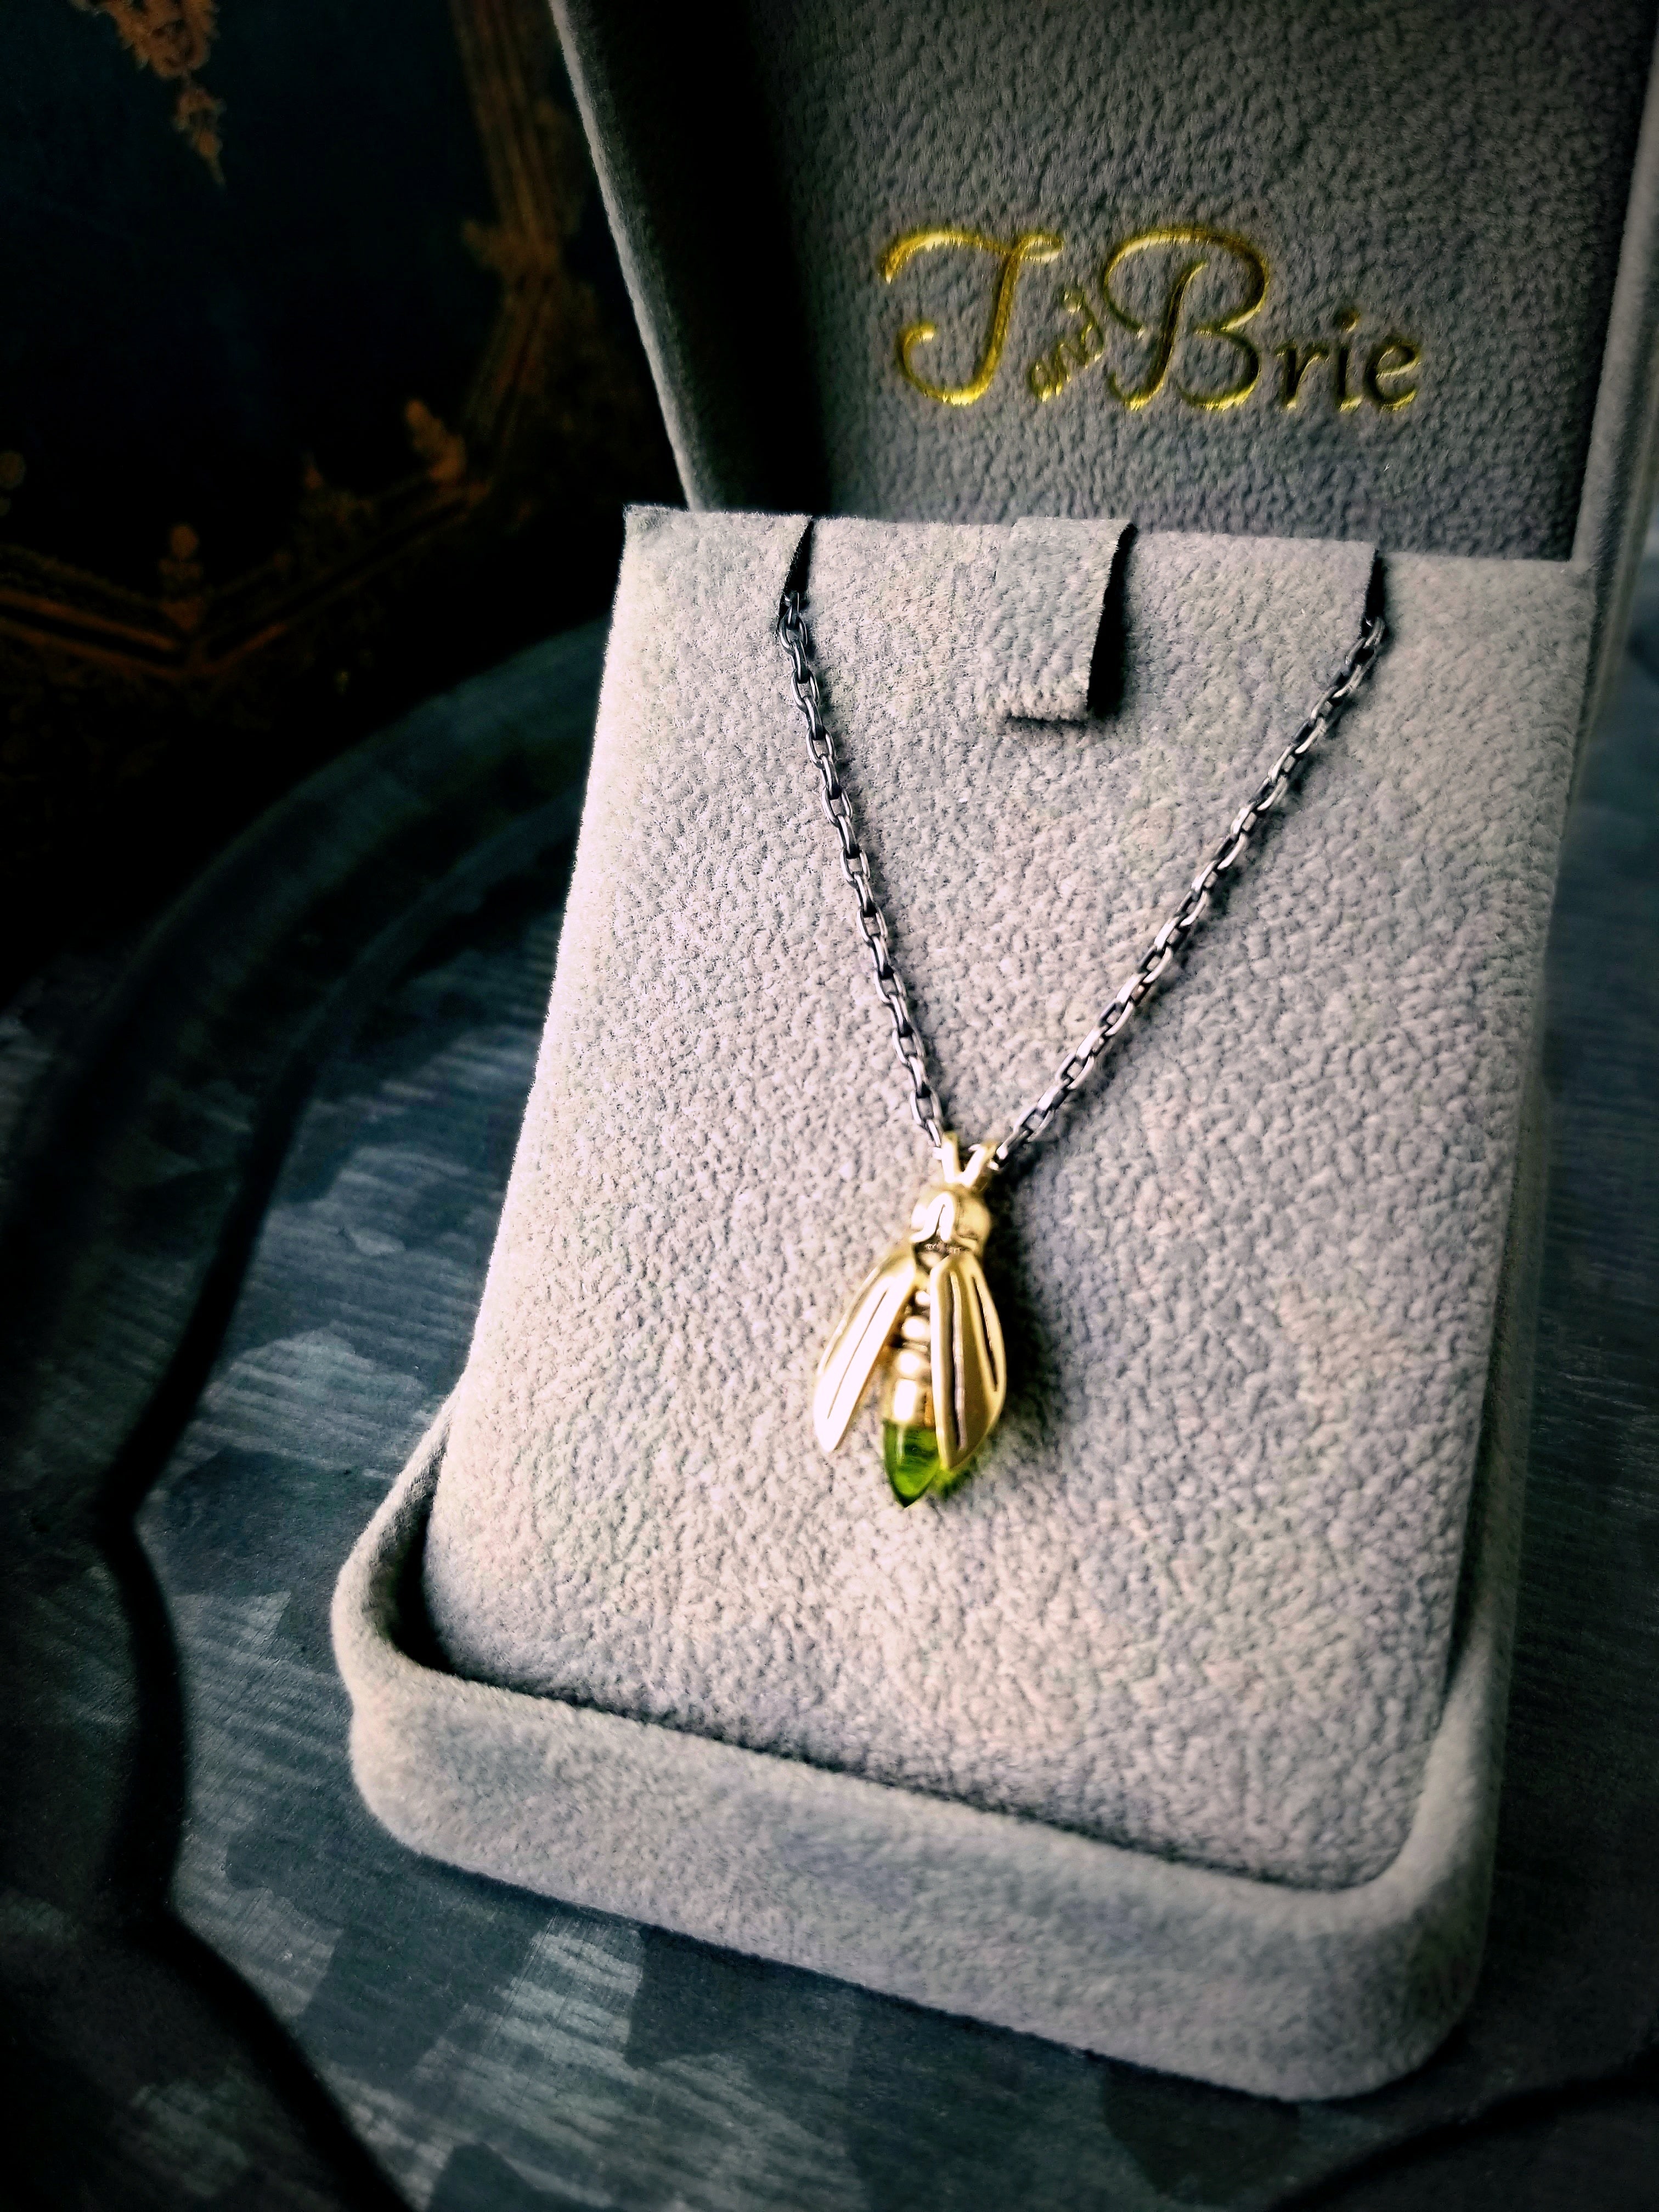 14k Gold Firefly Necklace on Antique Sterling Silver Chain